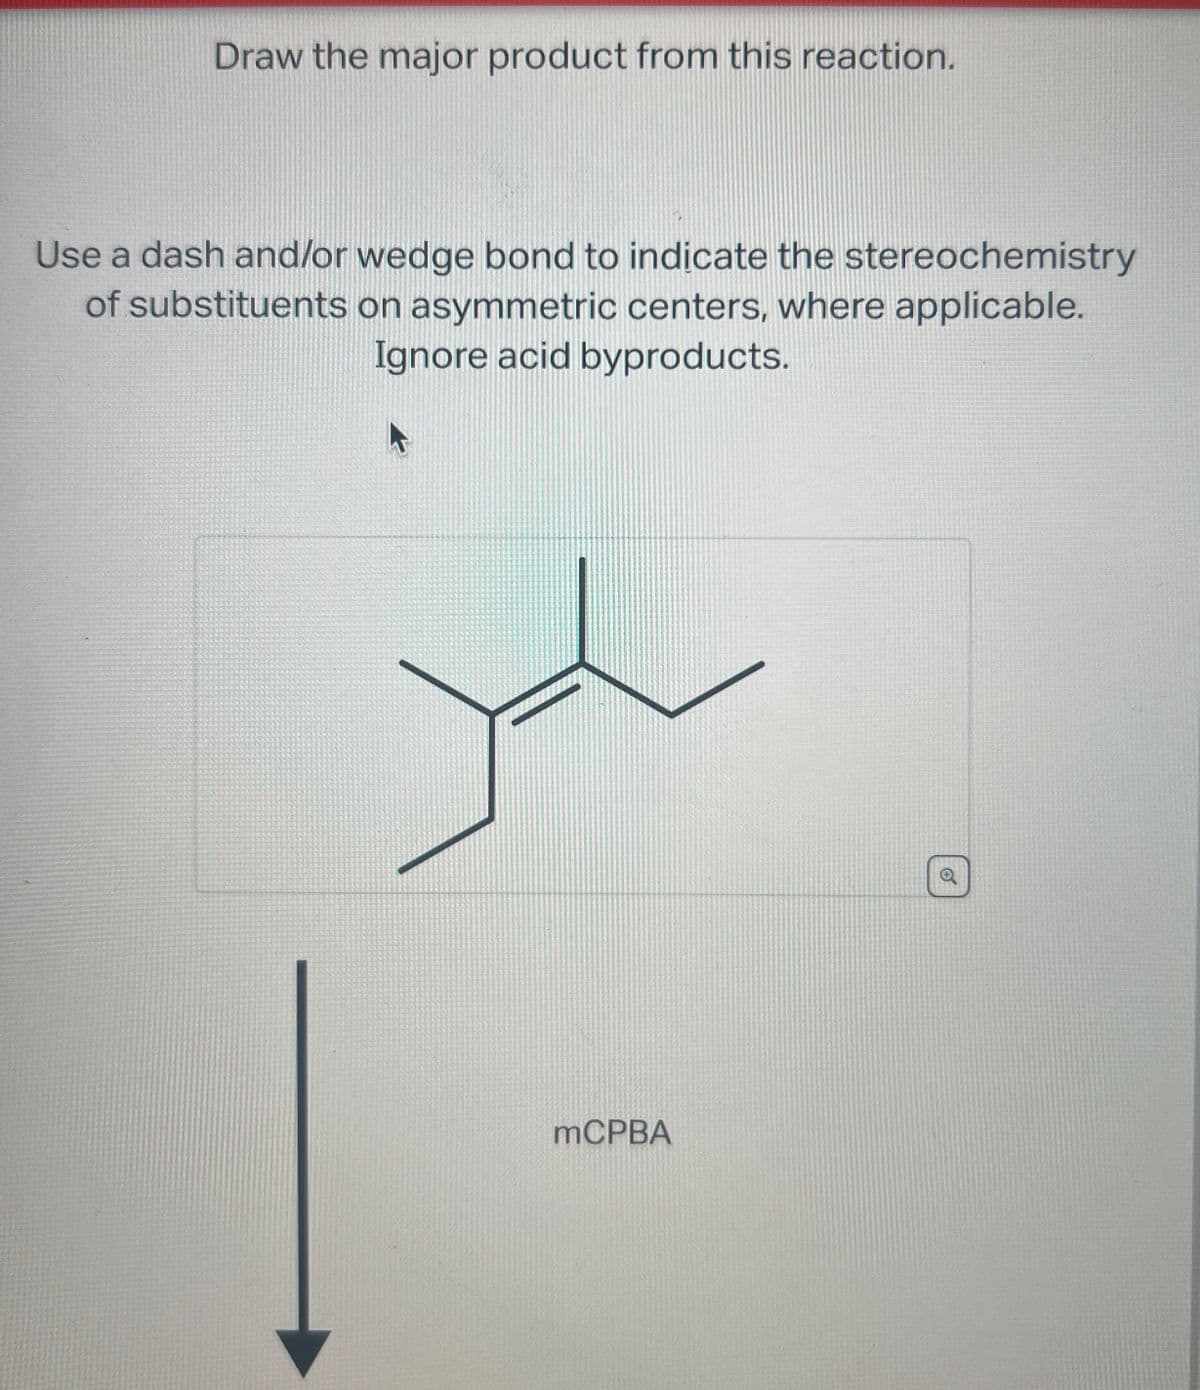 Draw the major product from this reaction.
Use a dash and/or wedge bond to indicate the stereochemistry
of substituents on asymmetric centers, where applicable.
Ignore acid byproducts.
MCPBA
0